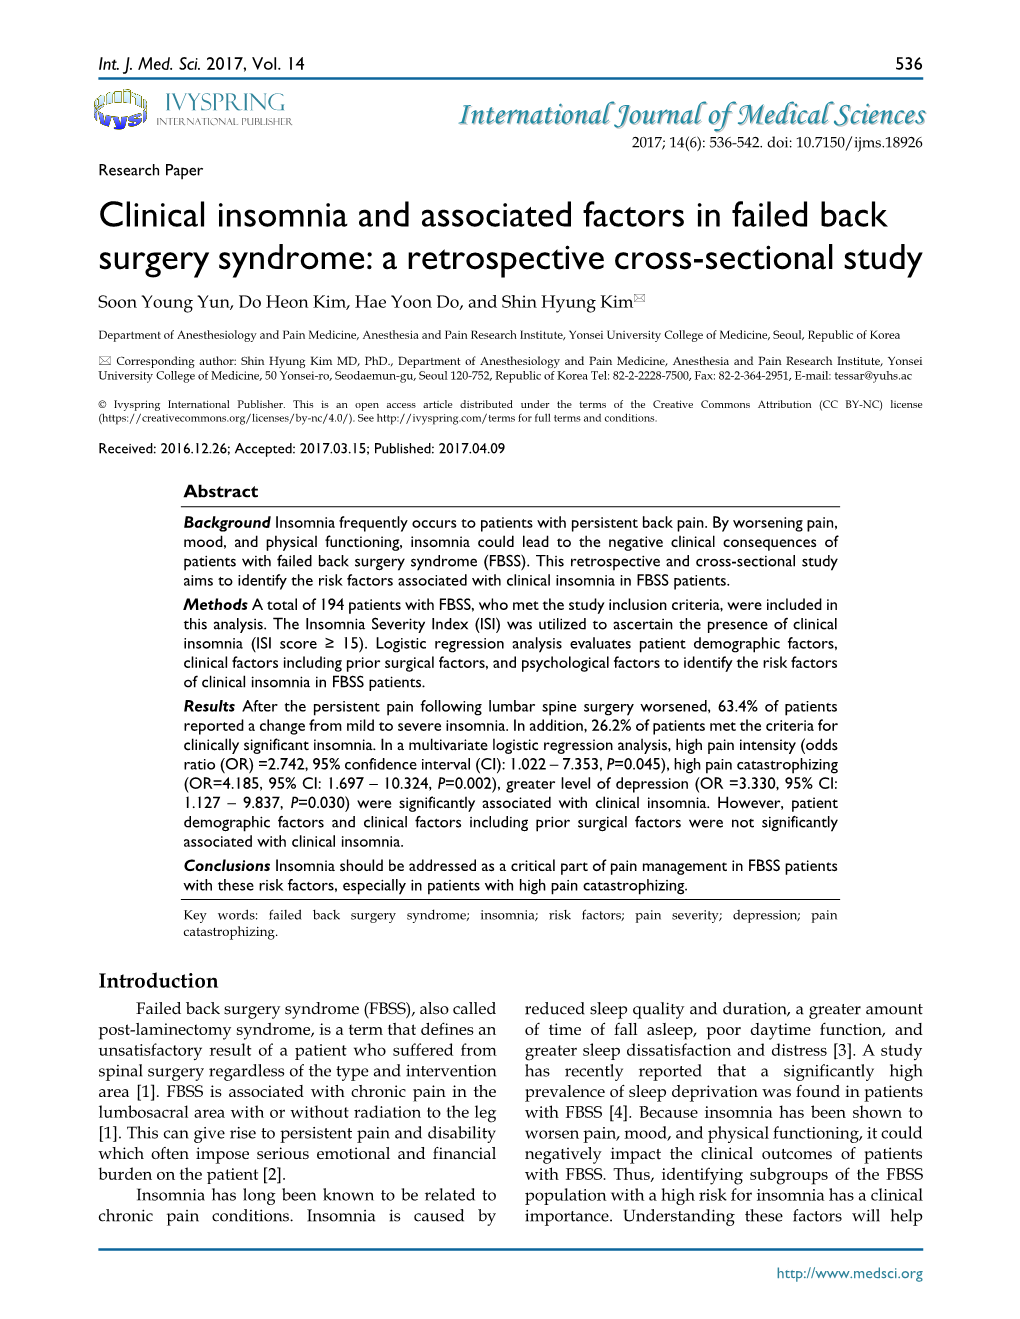 Clinical Insomnia and Associated Factors in Failed Back Surgery